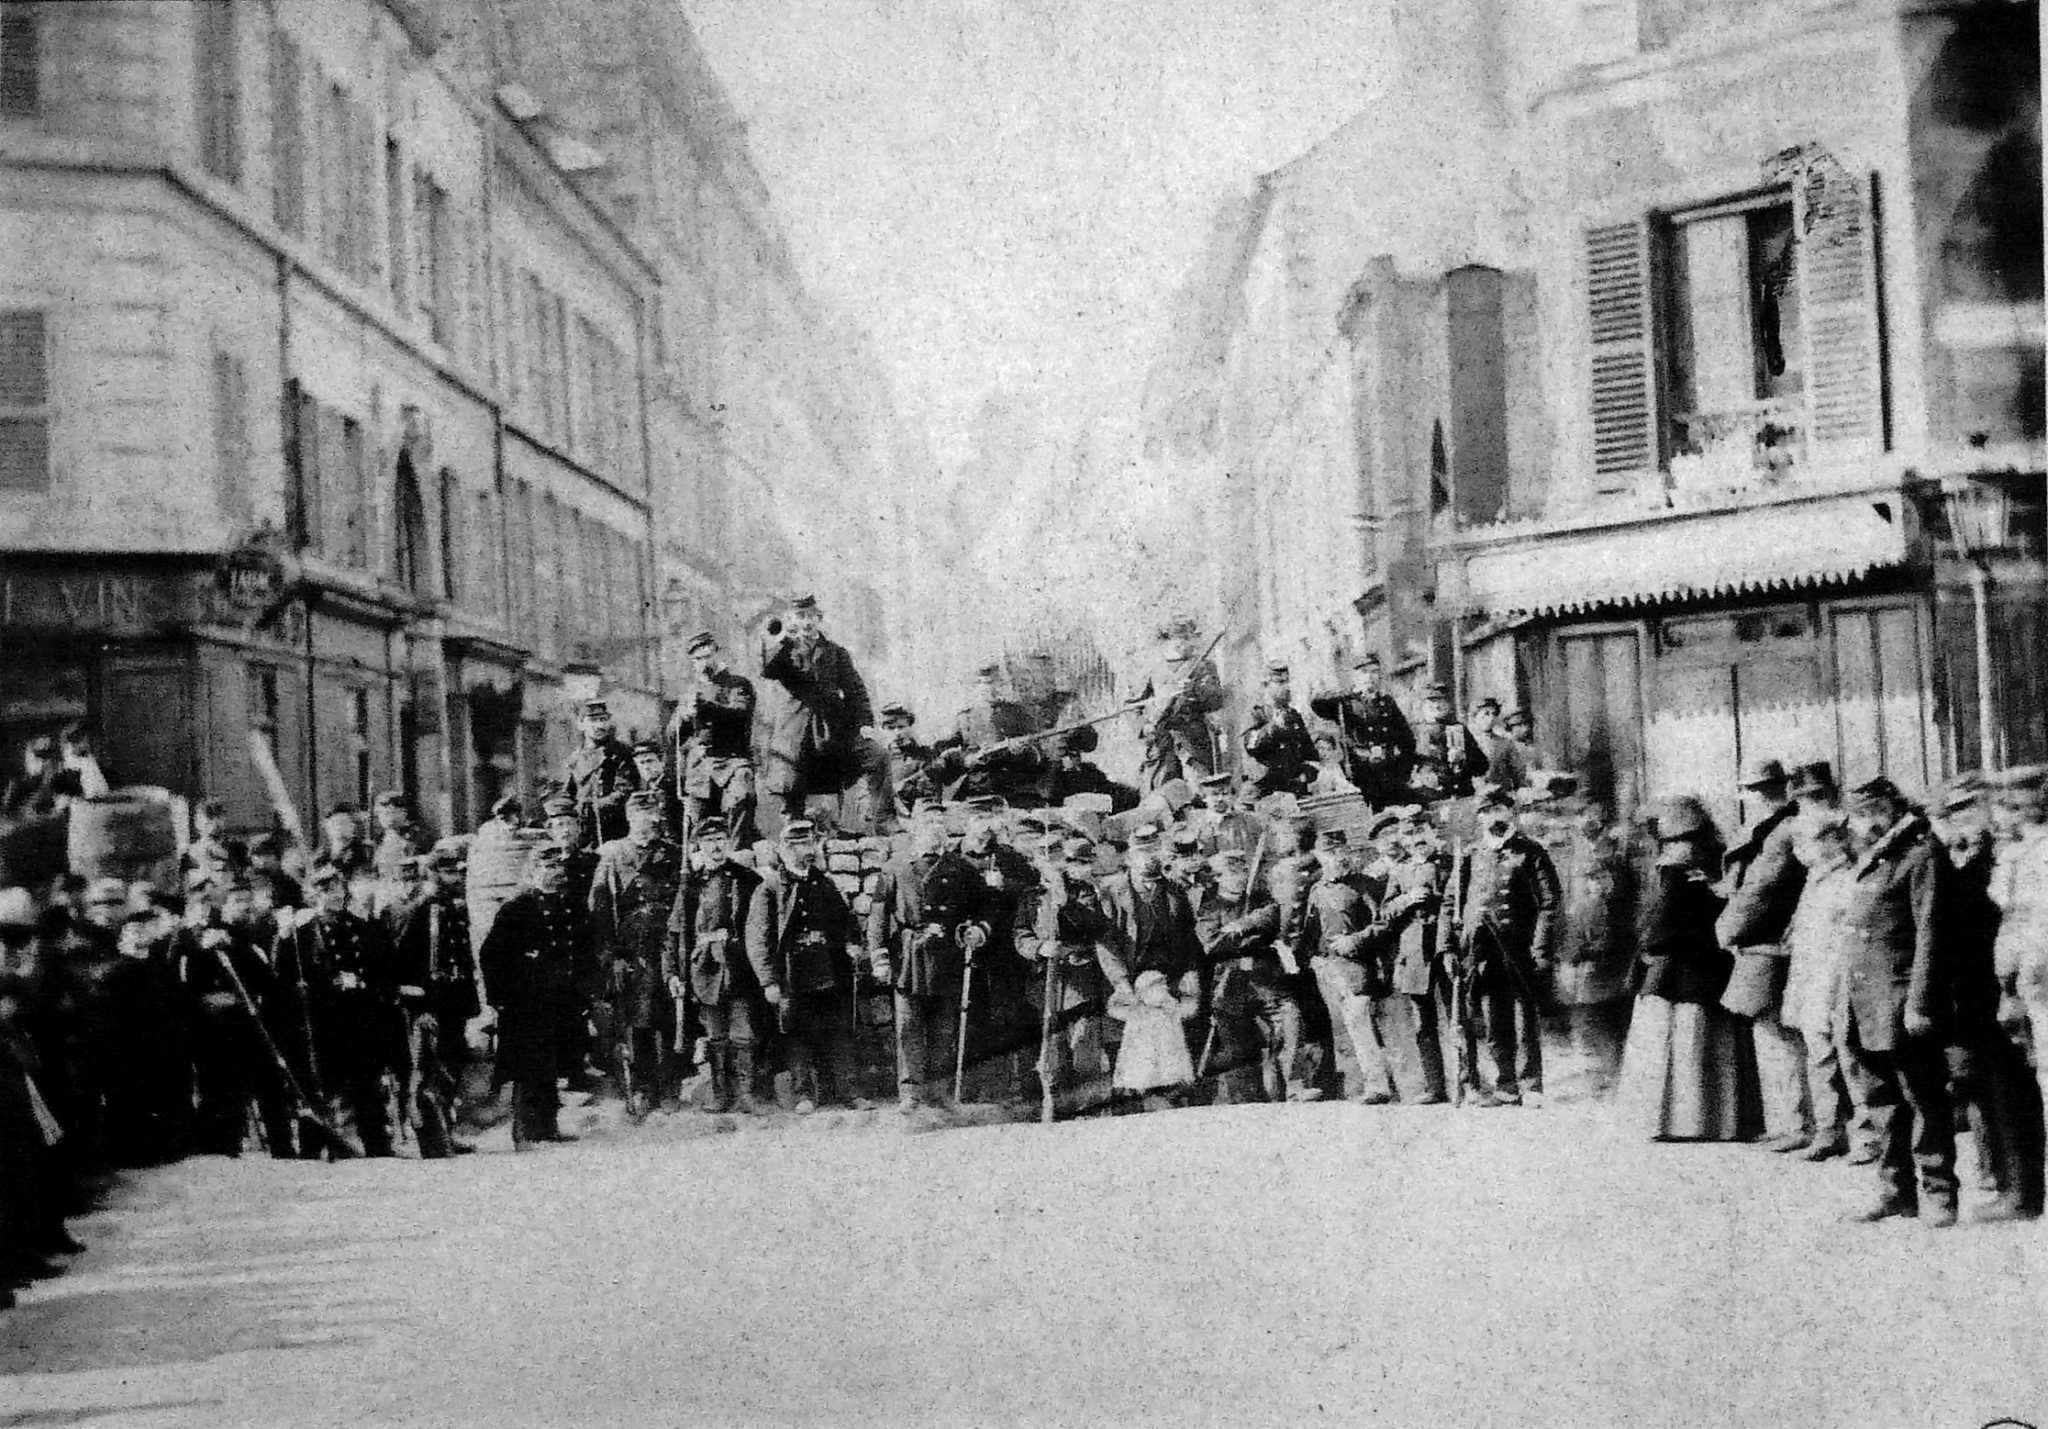 Barricade rue Saint-Sébastien at the crossroads with boulevard Richard-Lenoir. Photo: Unknown. Collection: Historical library of the City of Paris. Public Domain.